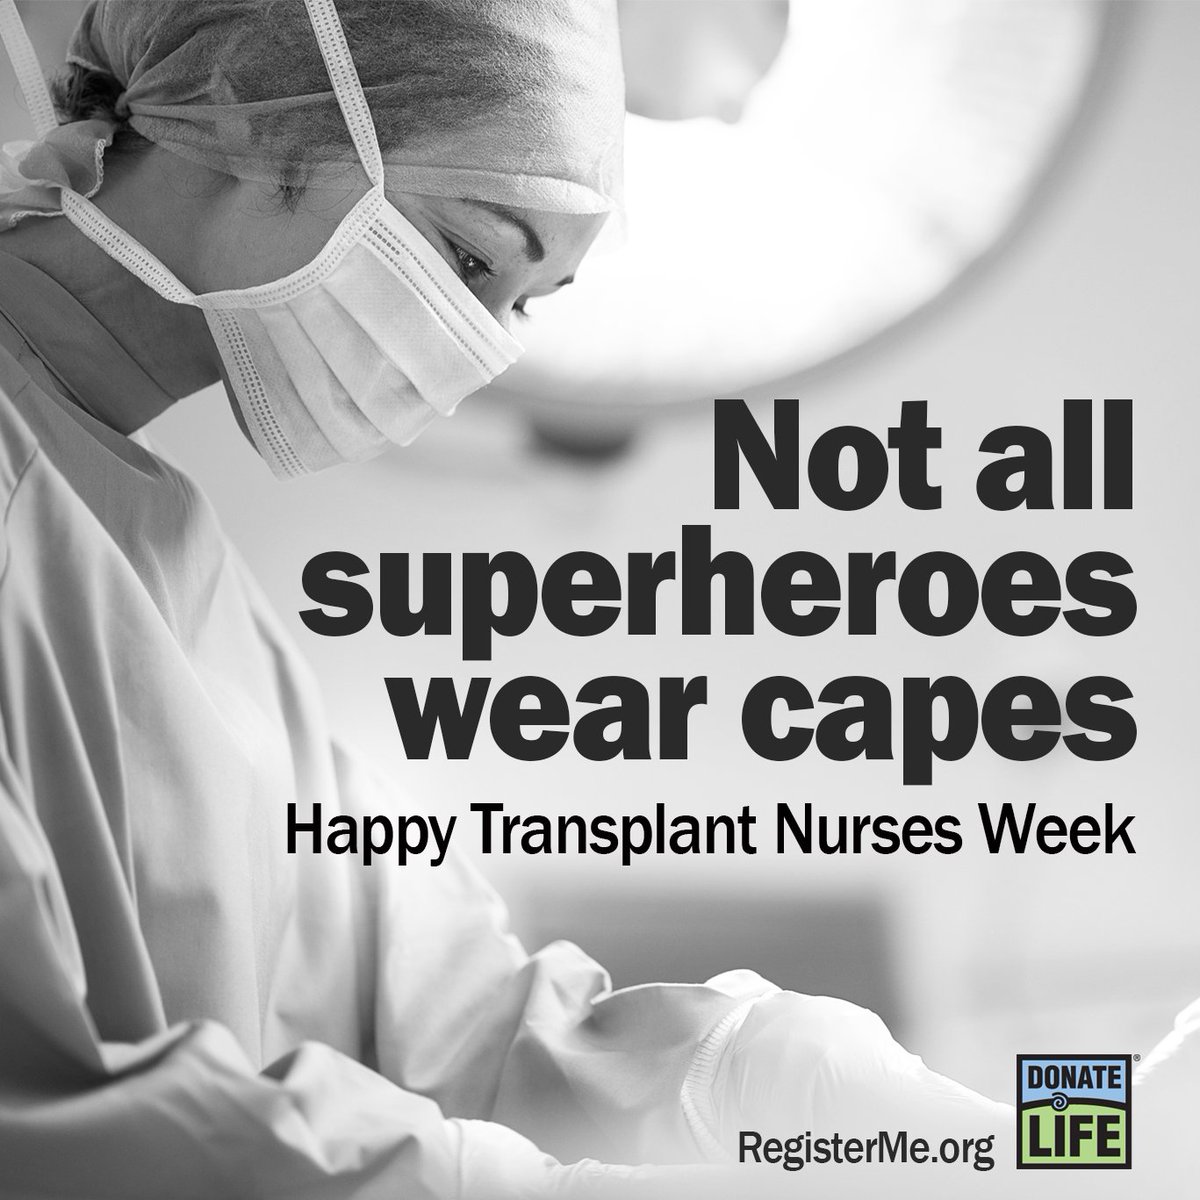 Not all superheroes wear capes. Thank you to all of the transplant nurses for your incredible dedication! You help make life possible. Give thanks to the transplant nurses who helped you in the comments below! #TransplantNursesWeek #DonateLife #DonateLifeMonth